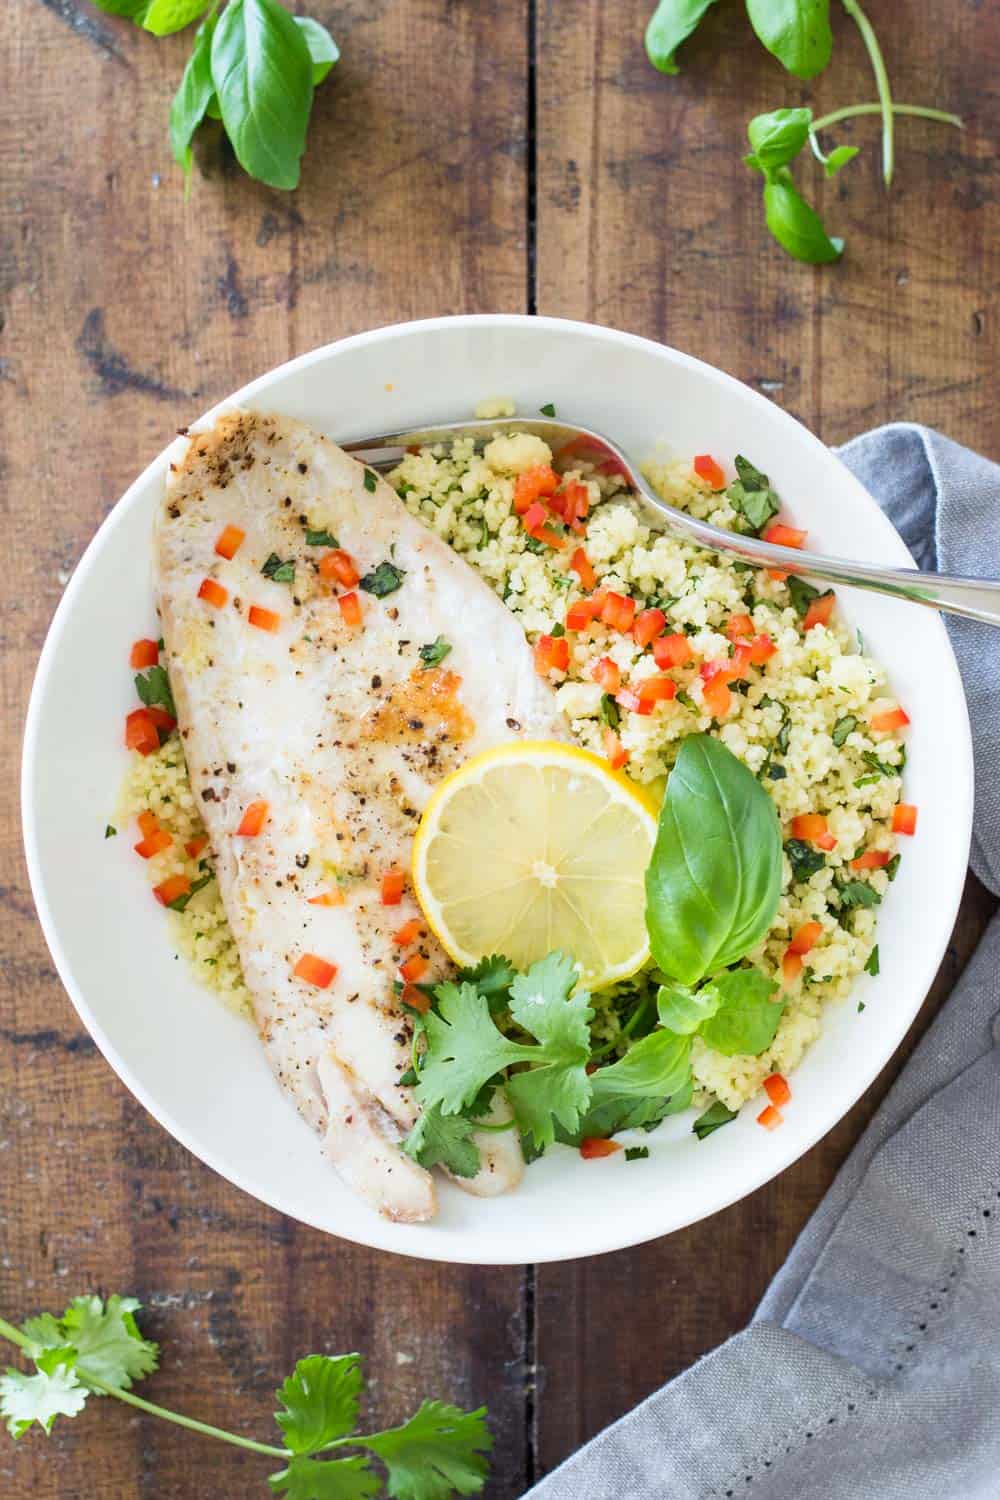 Baked Haddock with Herb Couscous on a white plate with a fork garnished with fresh herbs and sliced lemon.